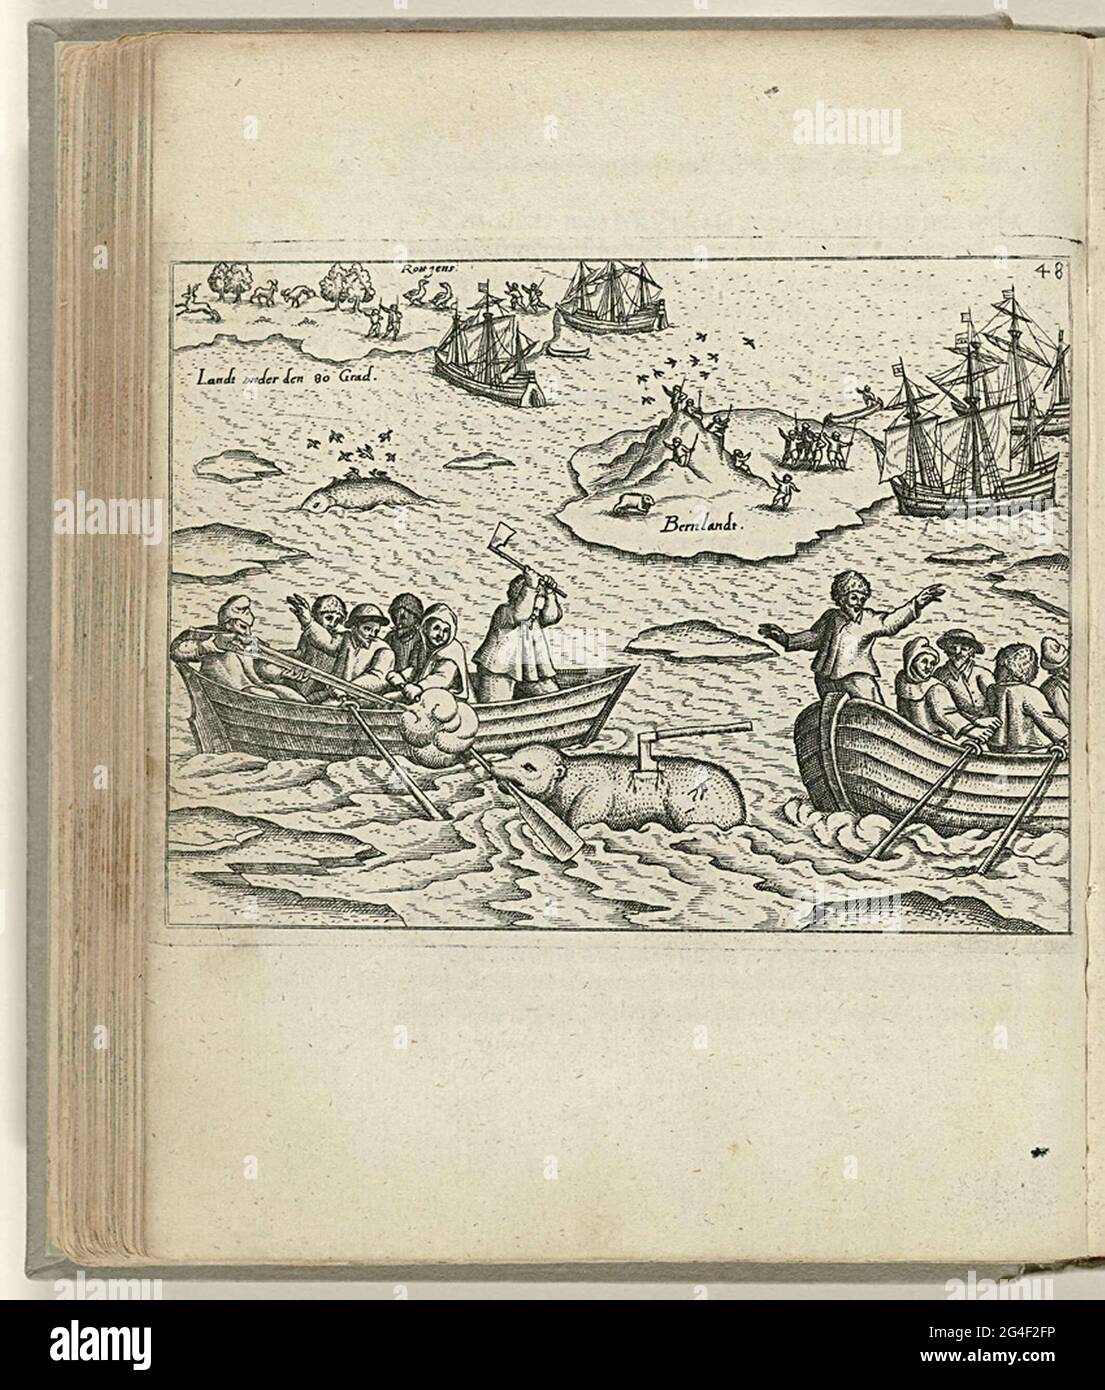 Fight With Polar Bear 11 And 12 June 1596 The Crew In Two Sloops Kills A Polar Bear In The Background Impressions Of The Visits To Beren Island And Spitsbergen Opposite